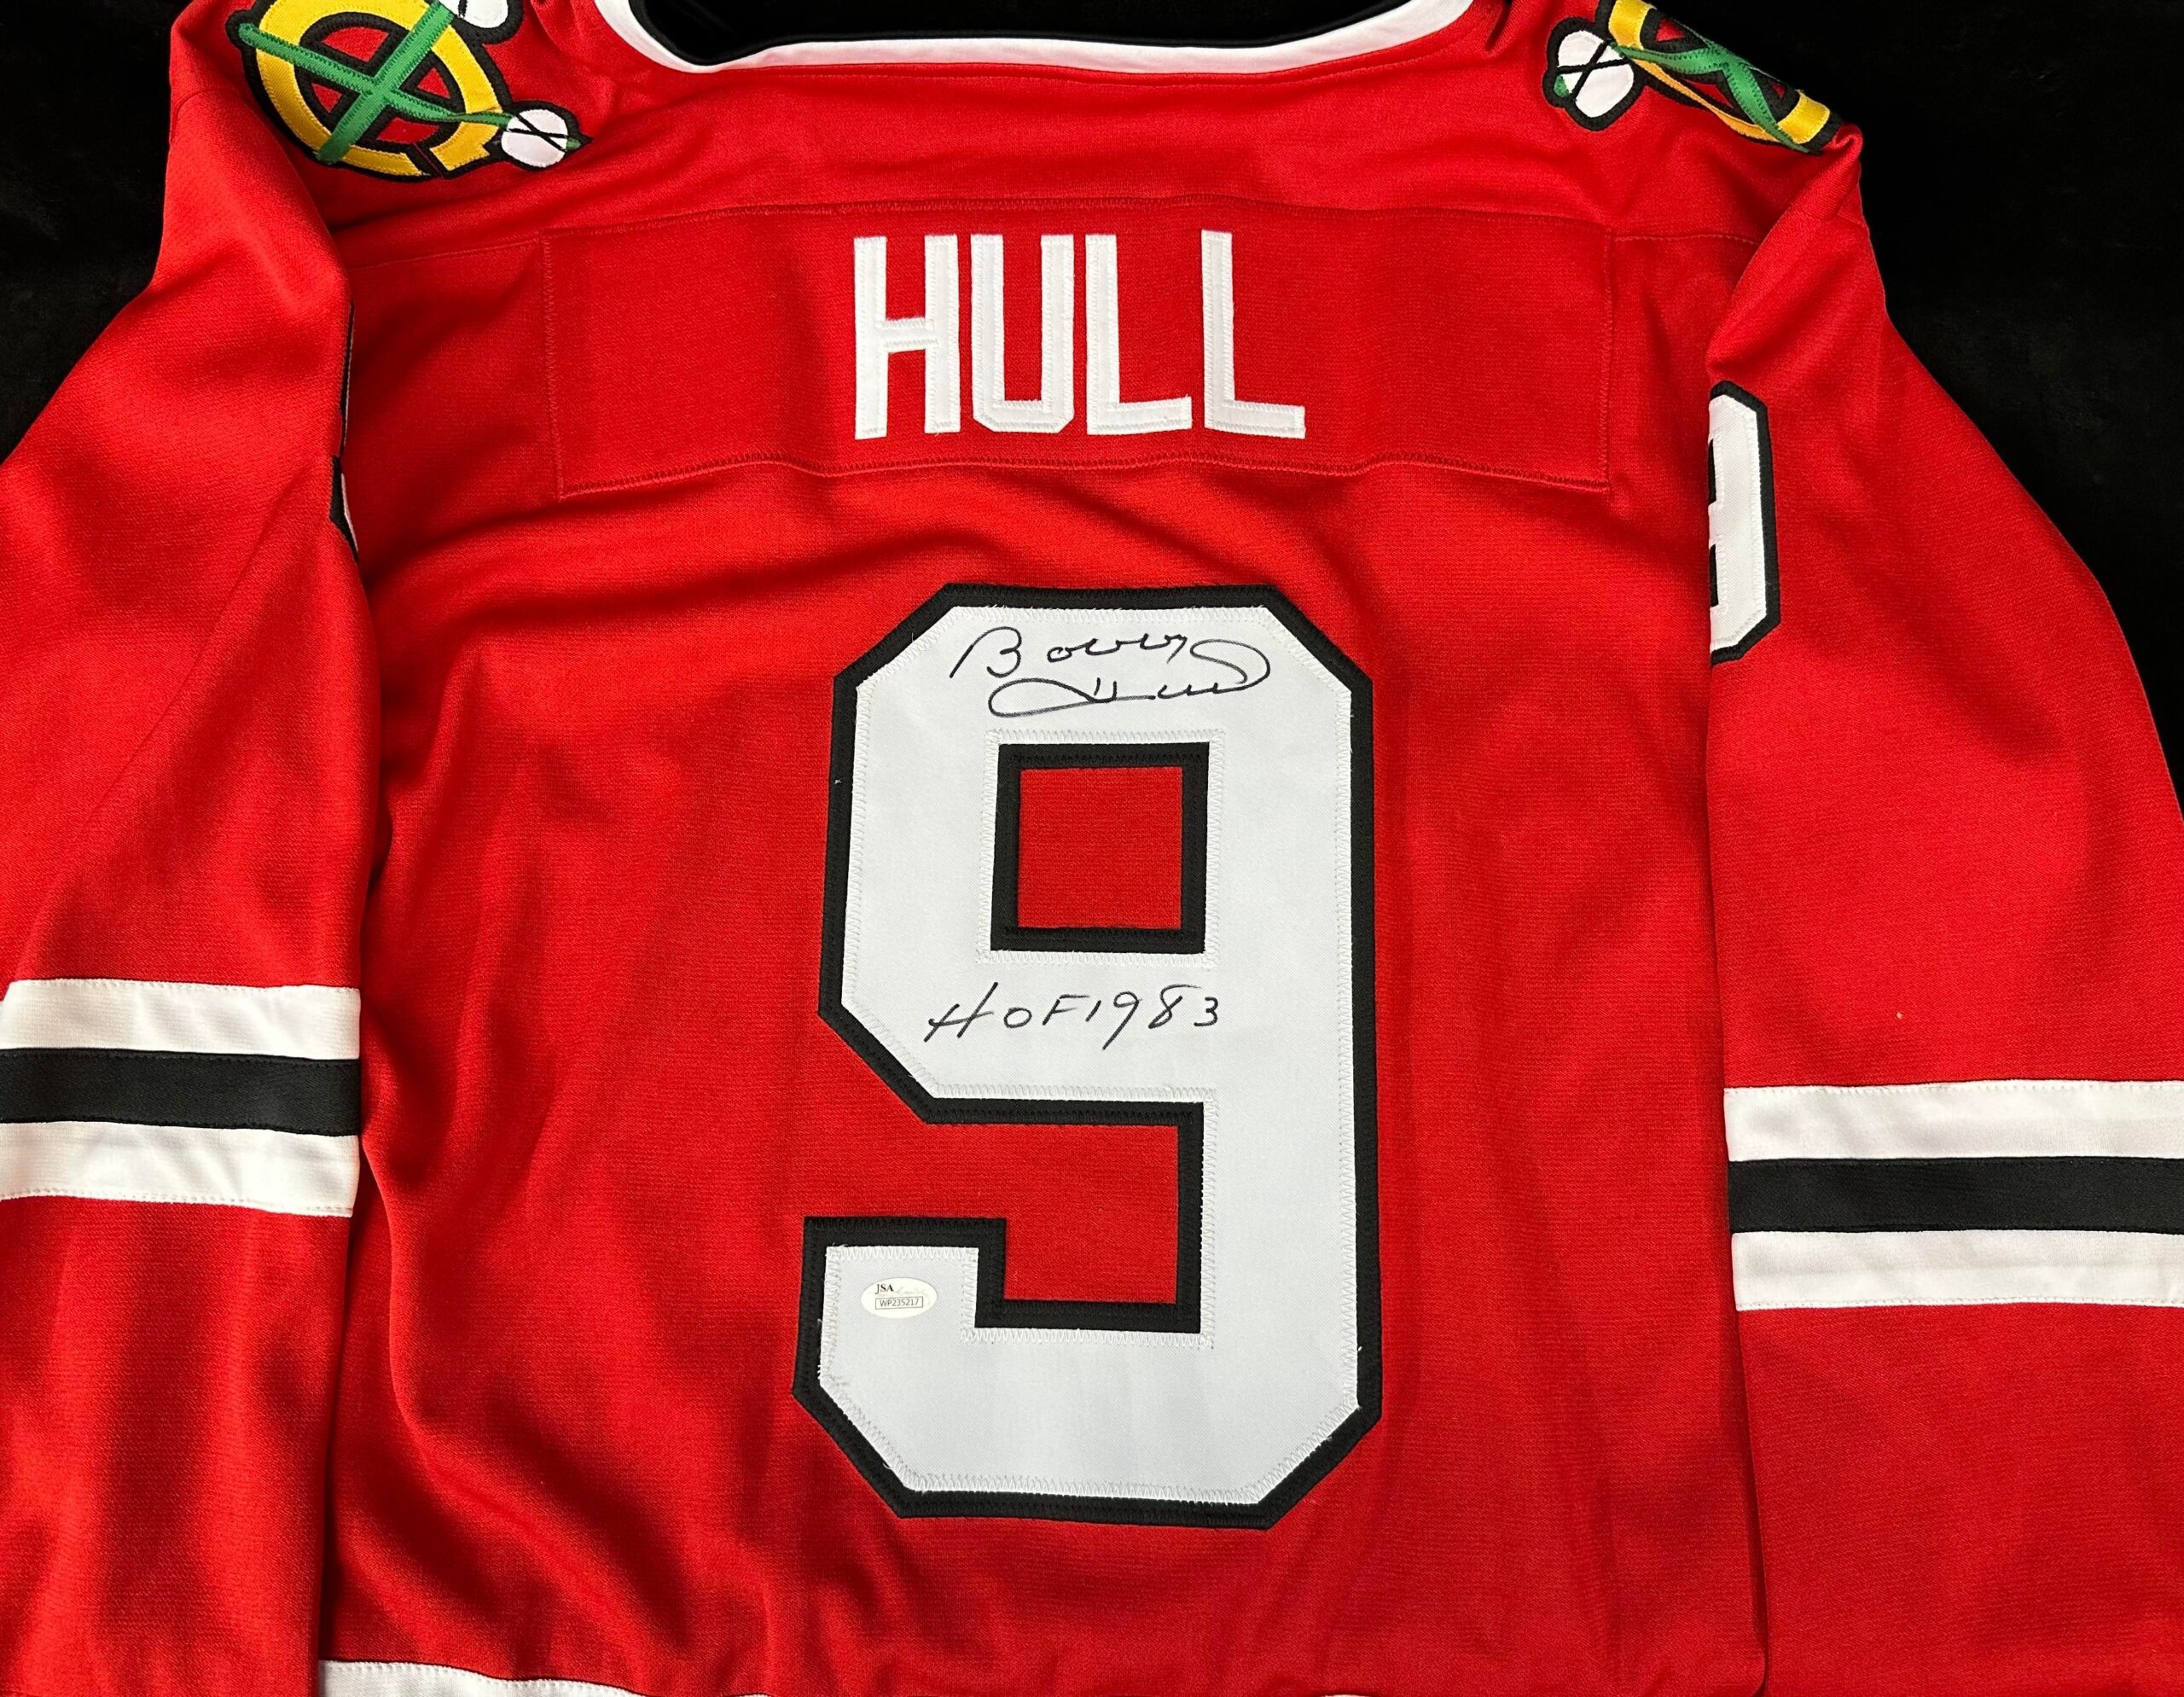 Bobby Hull autographed Jersey (Hartford Whalers)